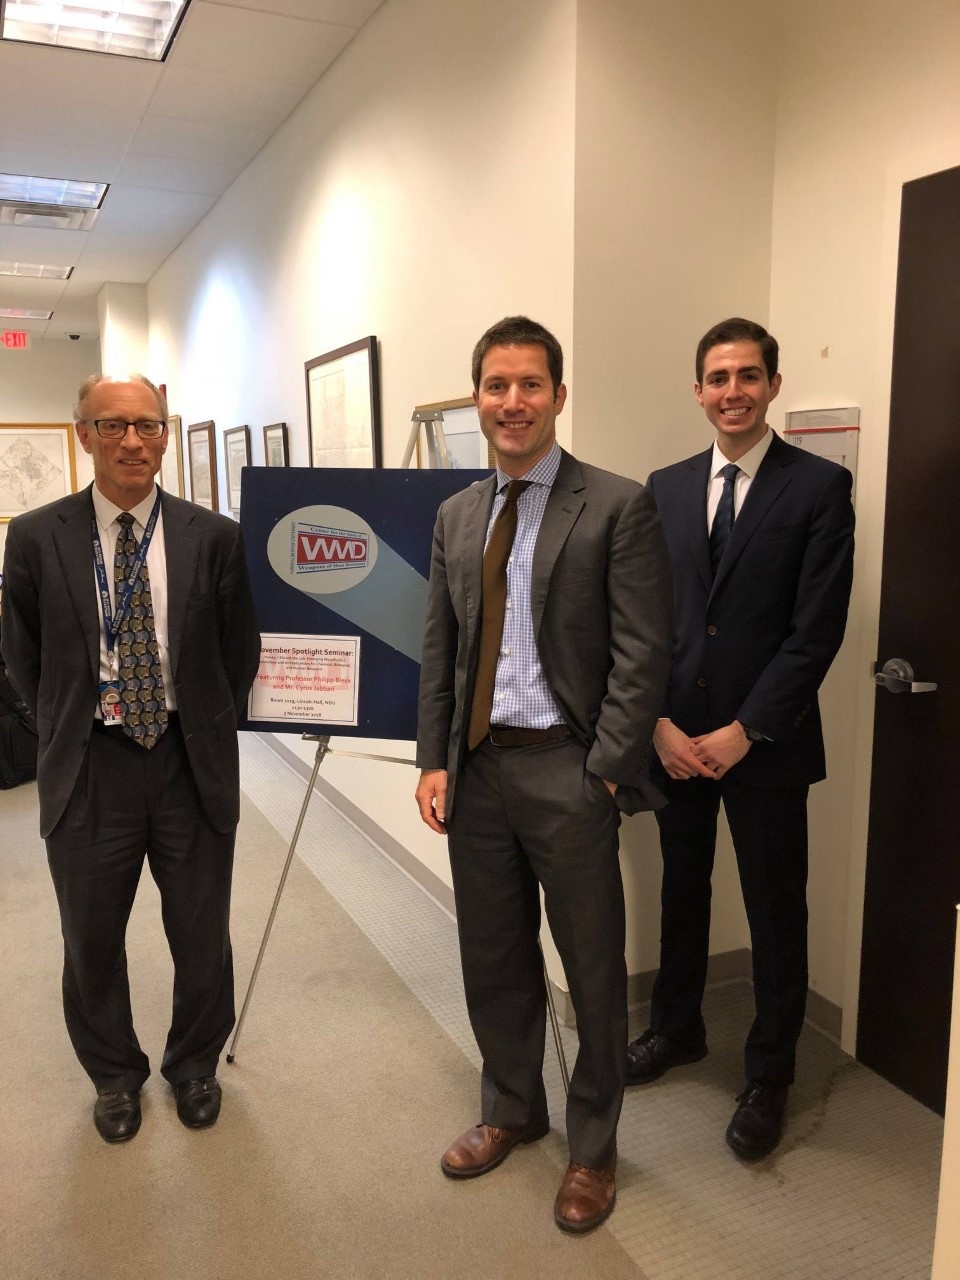 Standing at left: Dr. Gerald Epstein, MA NPTS student Cyrus Jabbari, and Associate Professor Philipp C. Bleek at the Center for the Study of WMD.